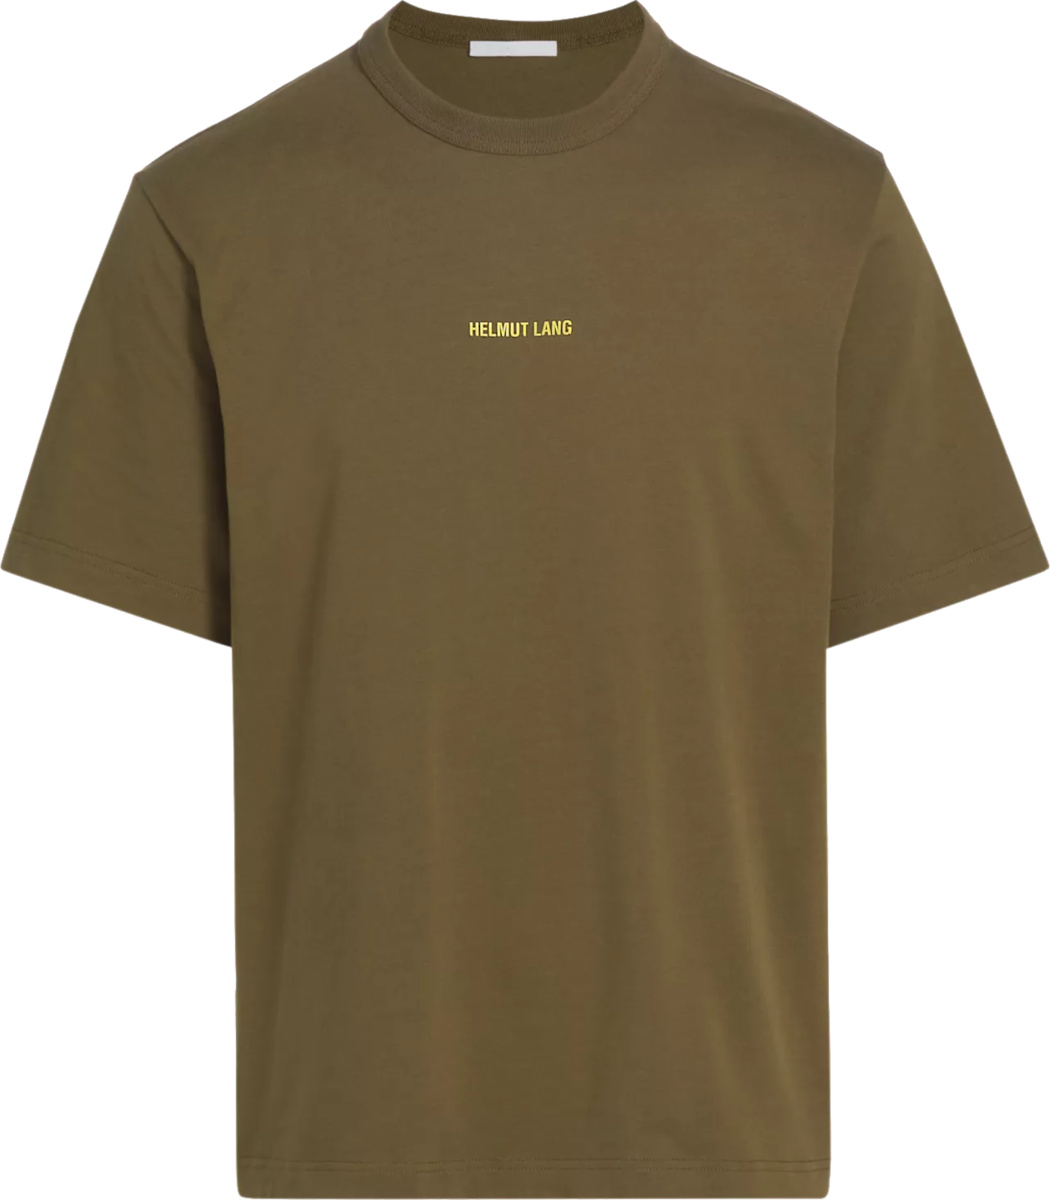 Helmut Lang Brown & Yellow Space Logo T-Shirt | INC STYLE